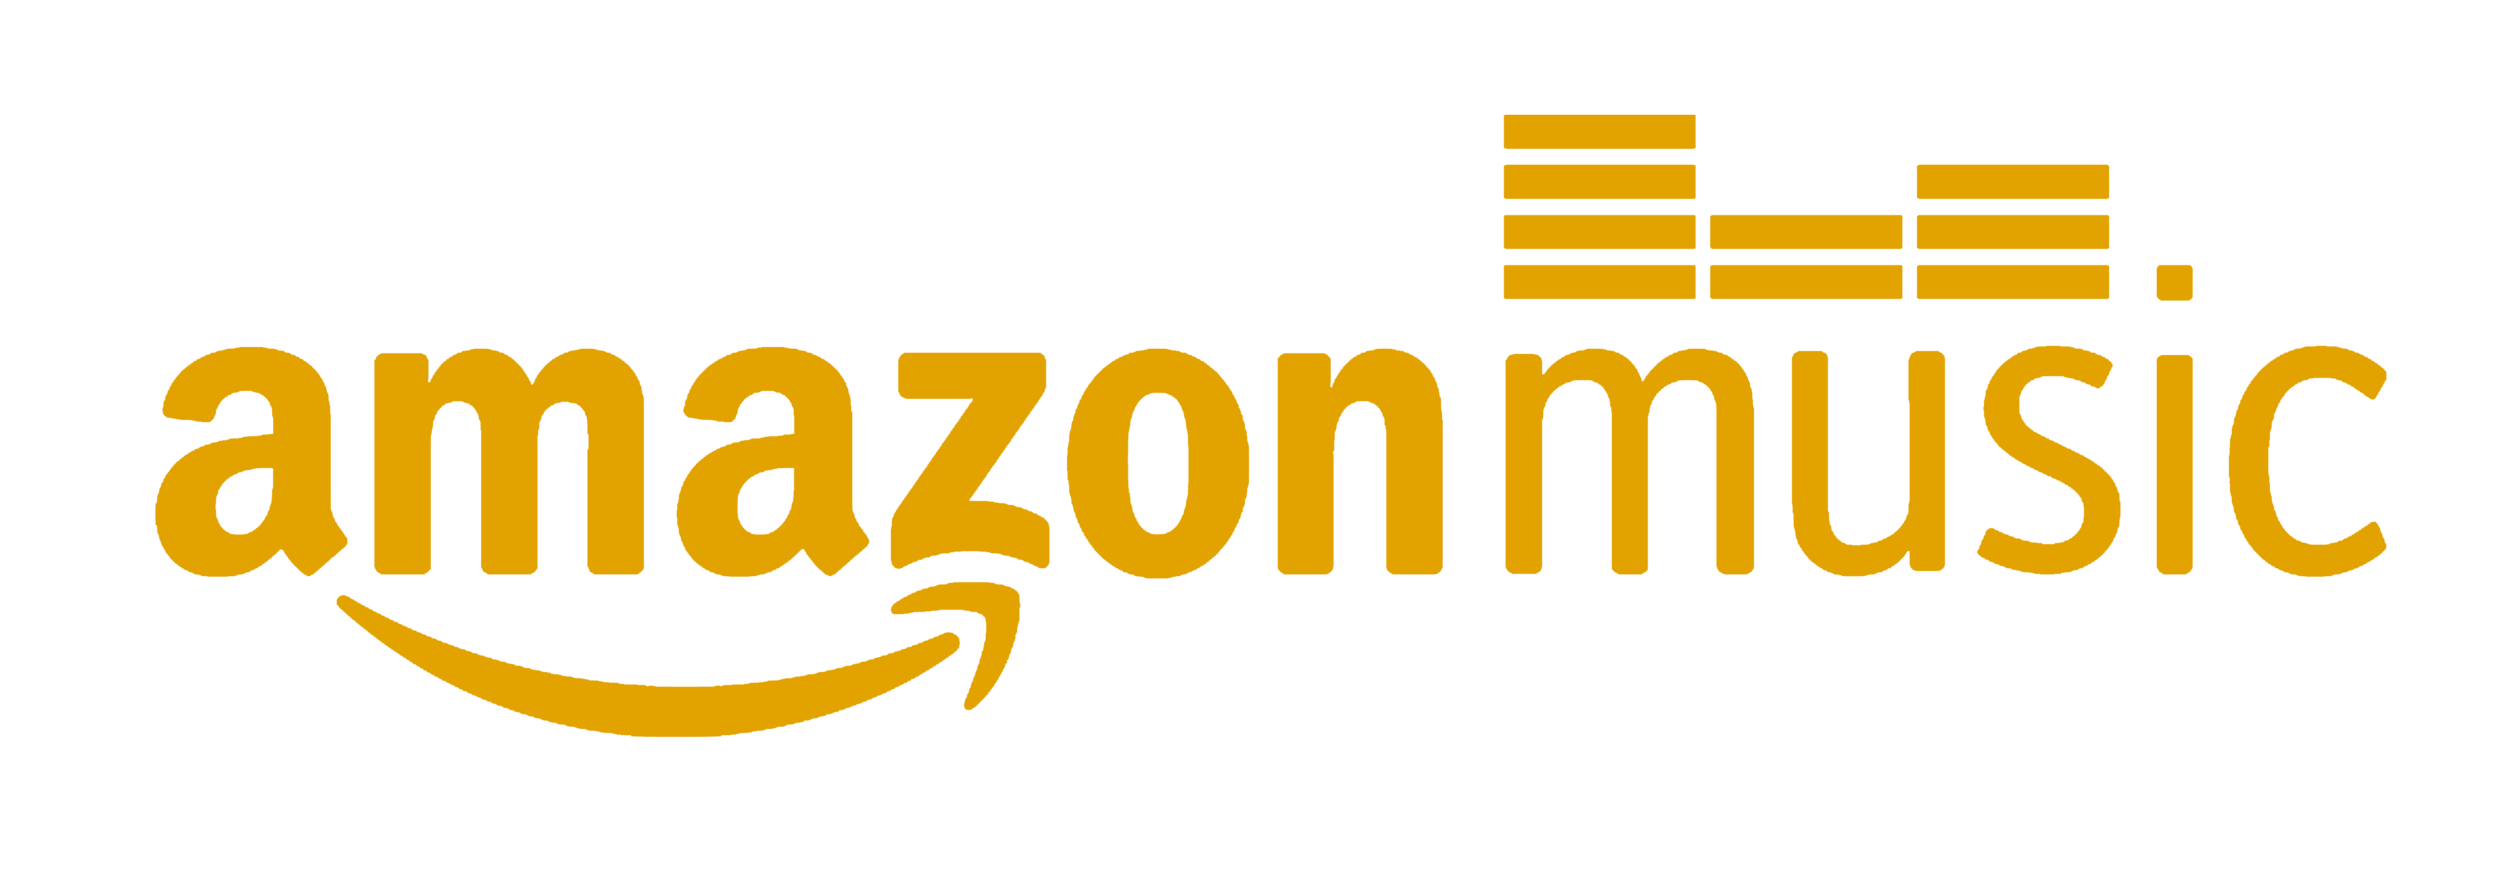 amazon-music-png-9.png